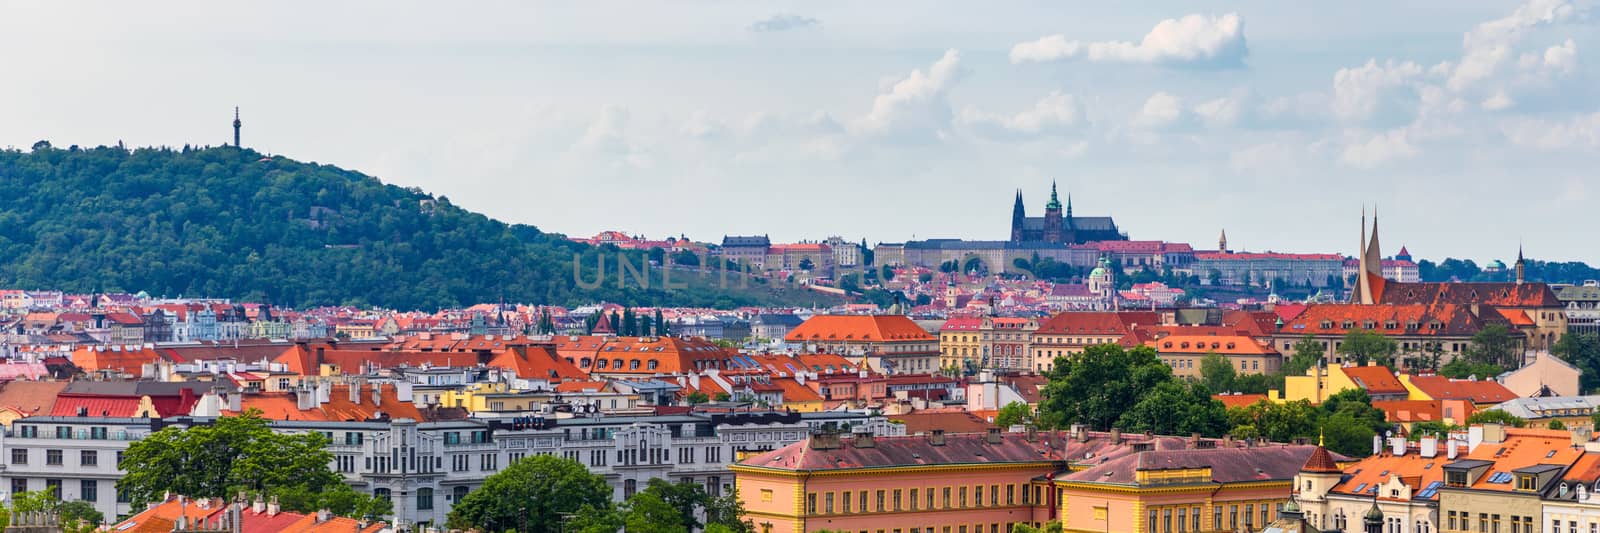 View of Prague Castle over red roof from Vysehrad area at sunset lights, Prague, Czech Republic. Scenic view of Prague city, Prague castle and Petrin tower from Vysehrad overlooking red roofs 